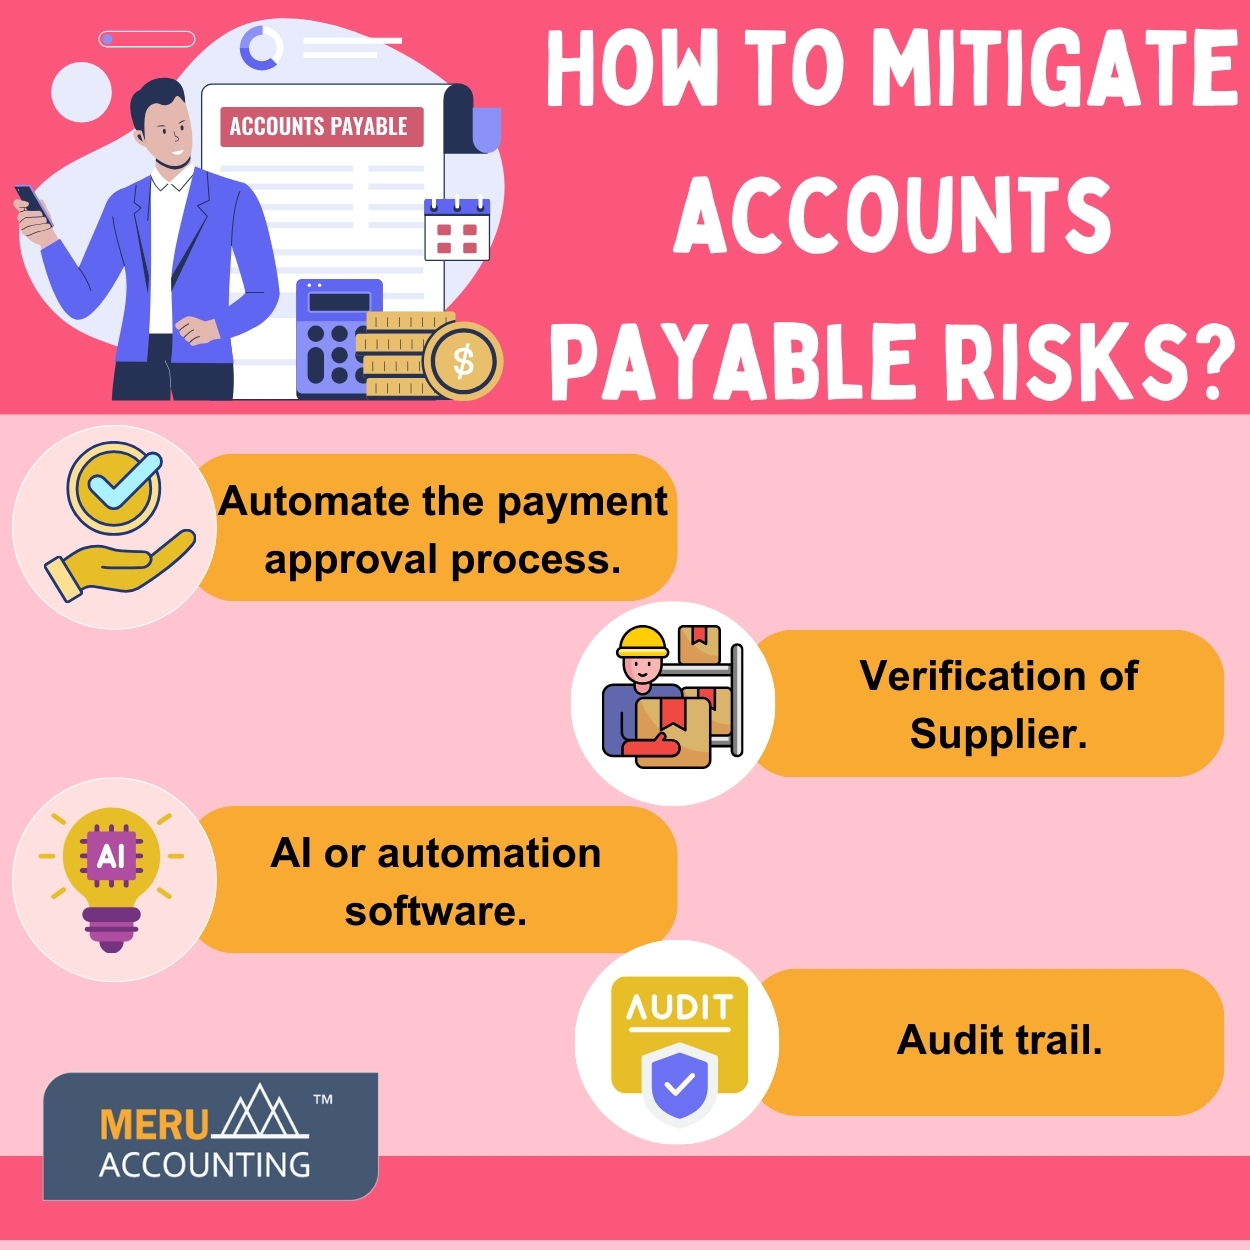 How to mitigate accounts payable risks 1250 by 1250